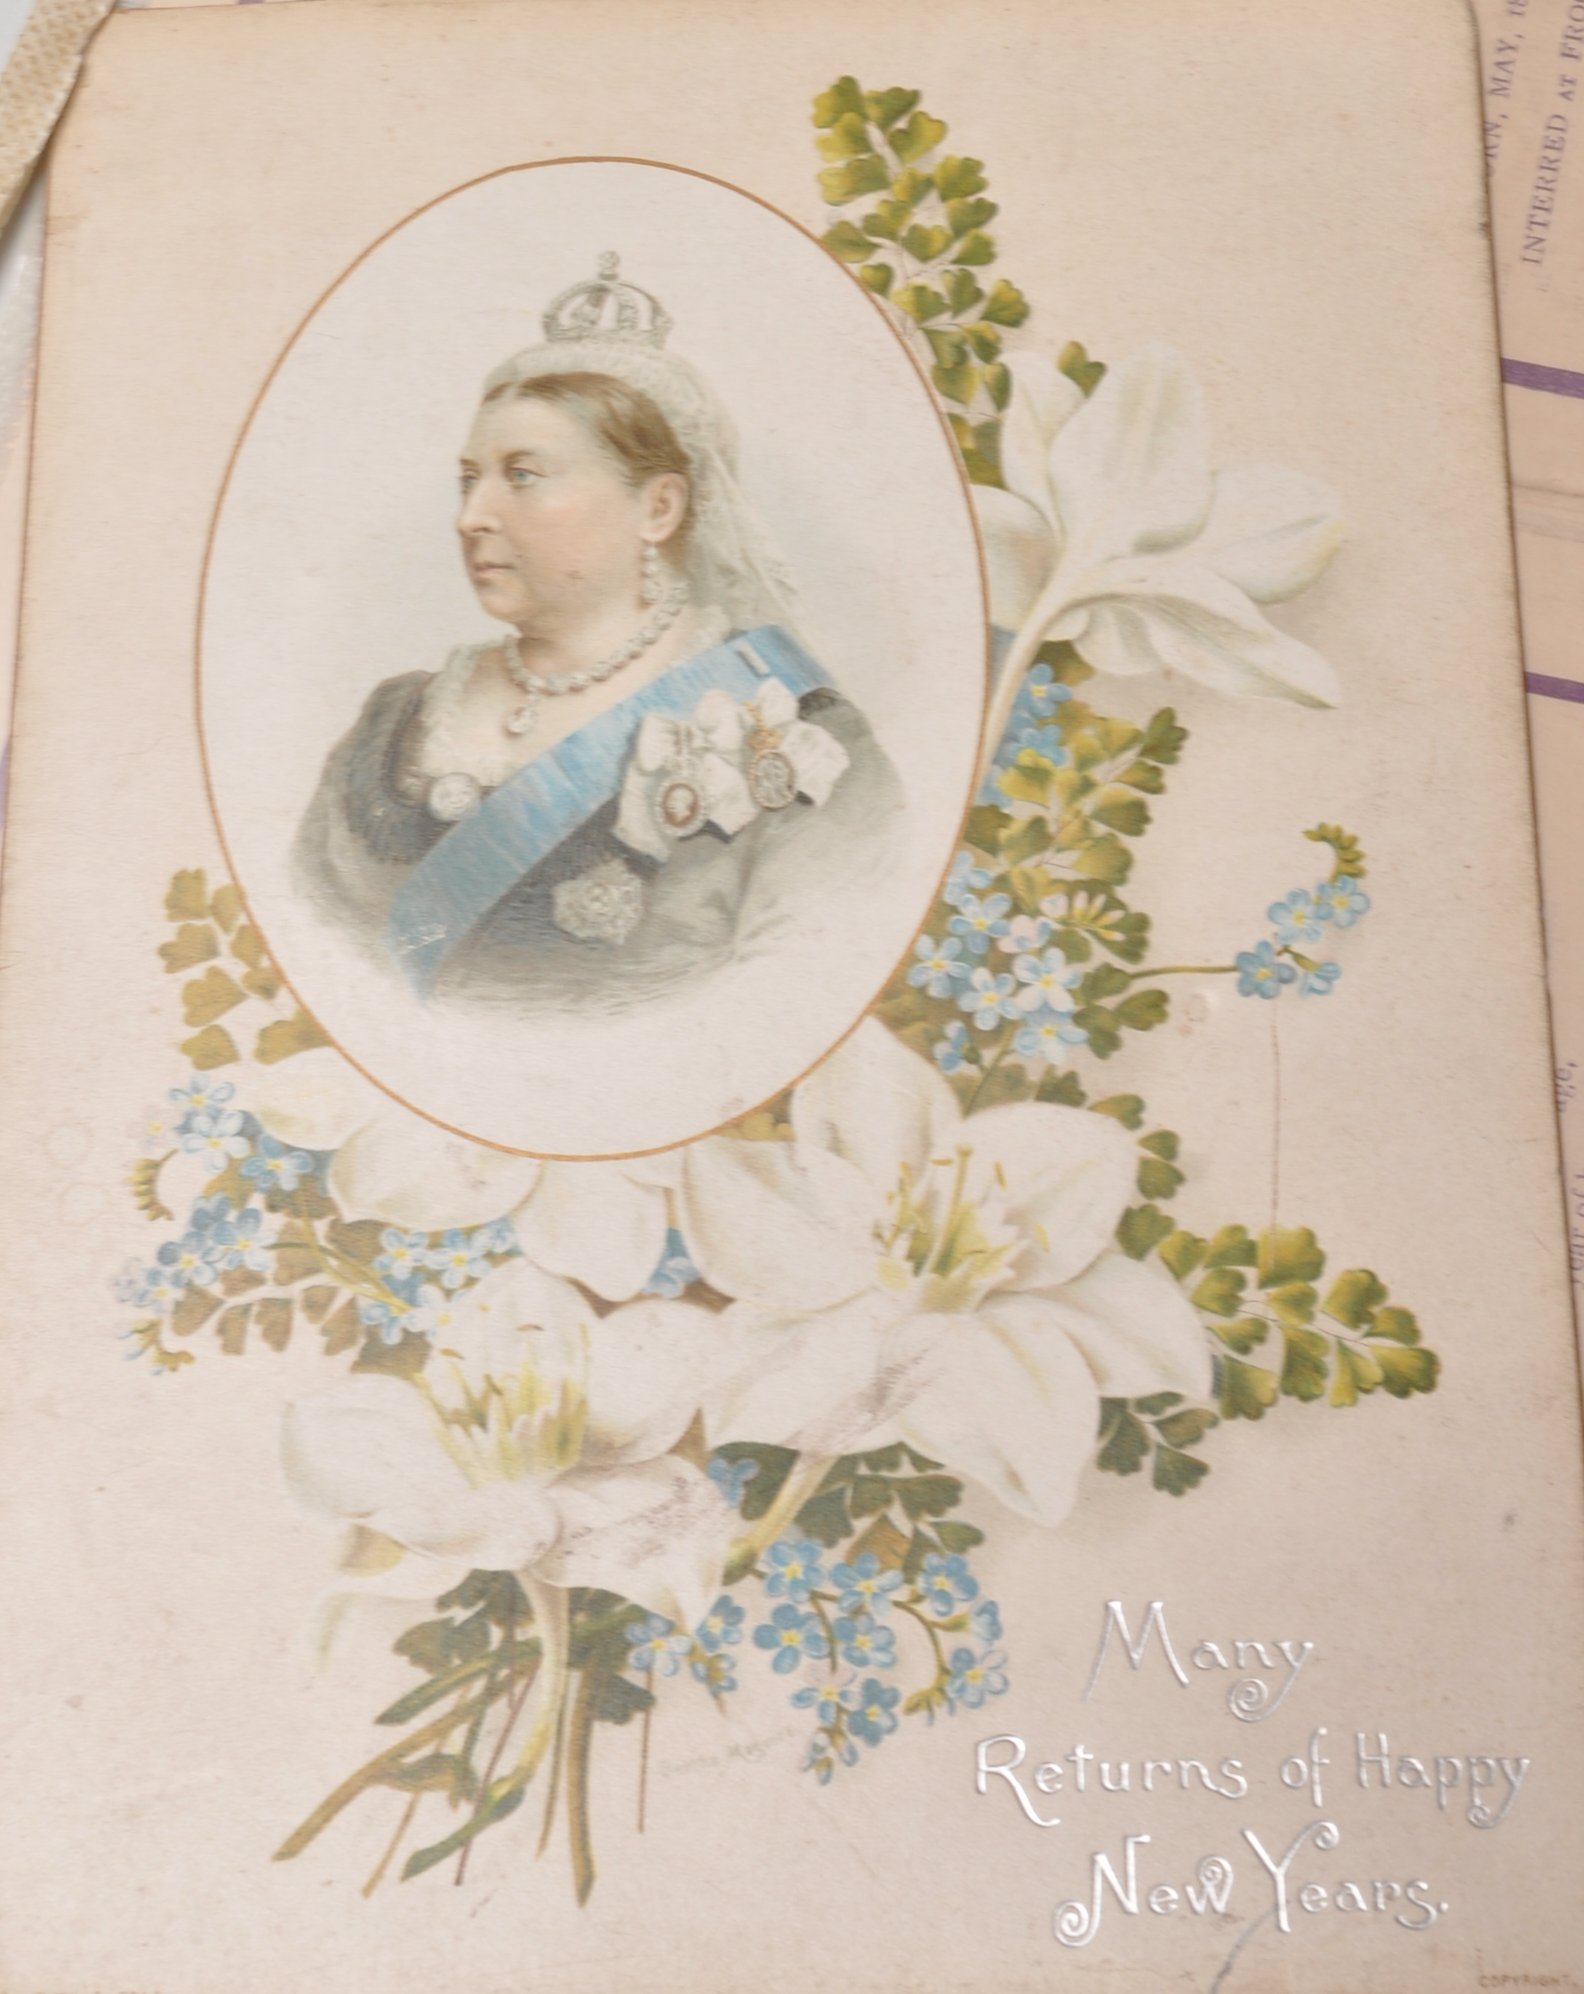 COLLECTION OF 20TH CENTURY ROYAL FAMILY EPHEMERAL - Image 12 of 14